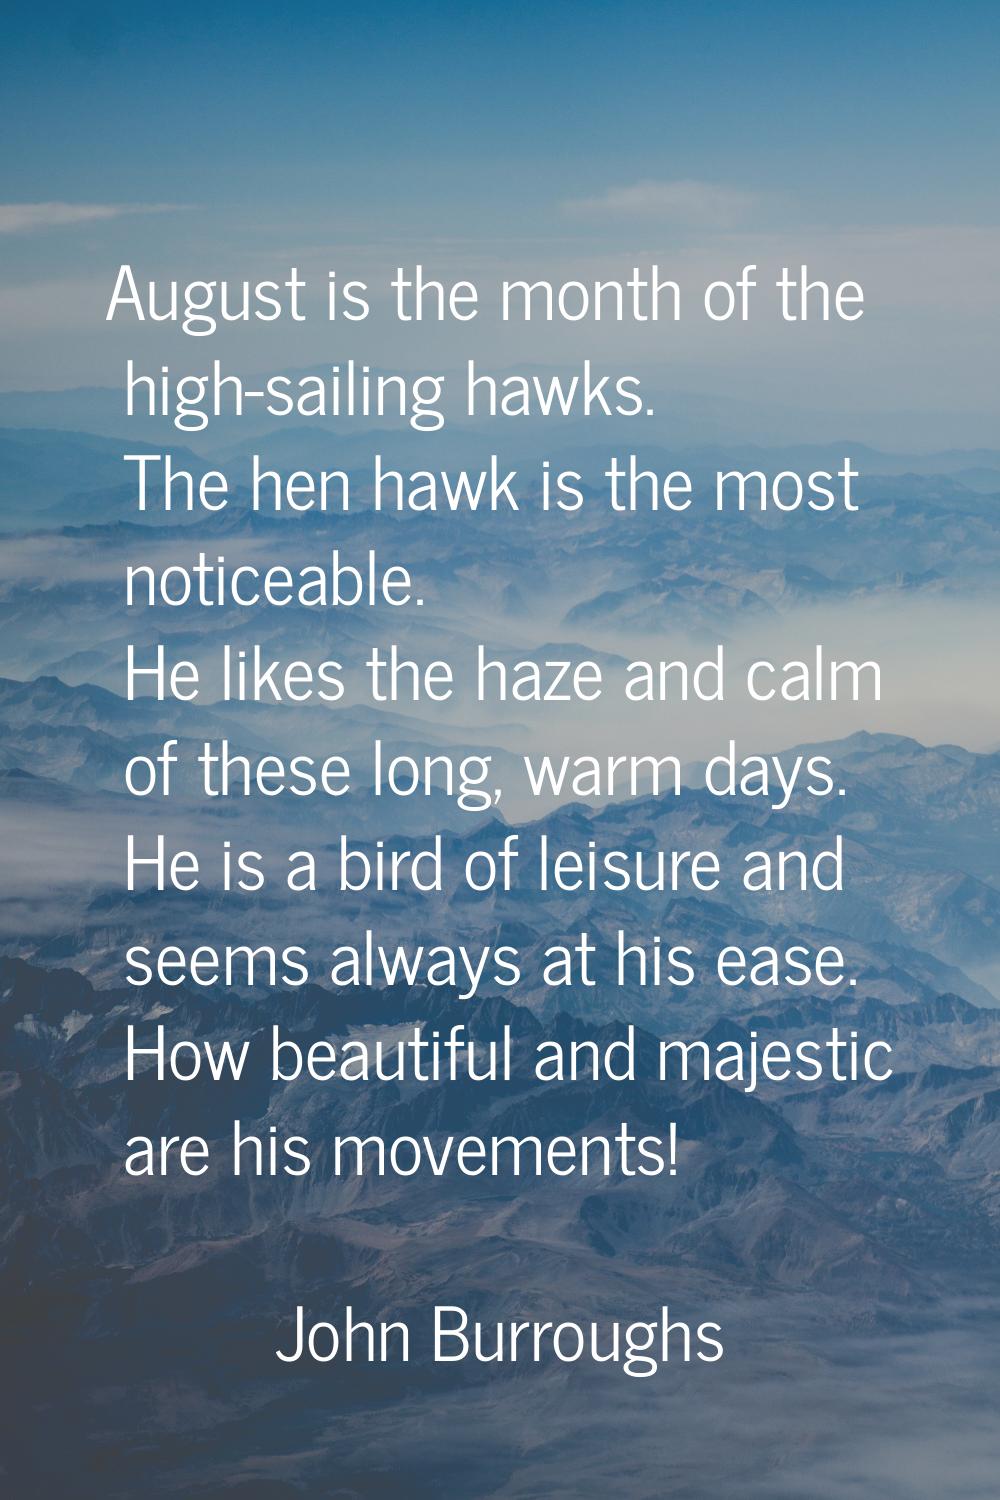 August is the month of the high-sailing hawks. The hen hawk is the most noticeable. He likes the ha